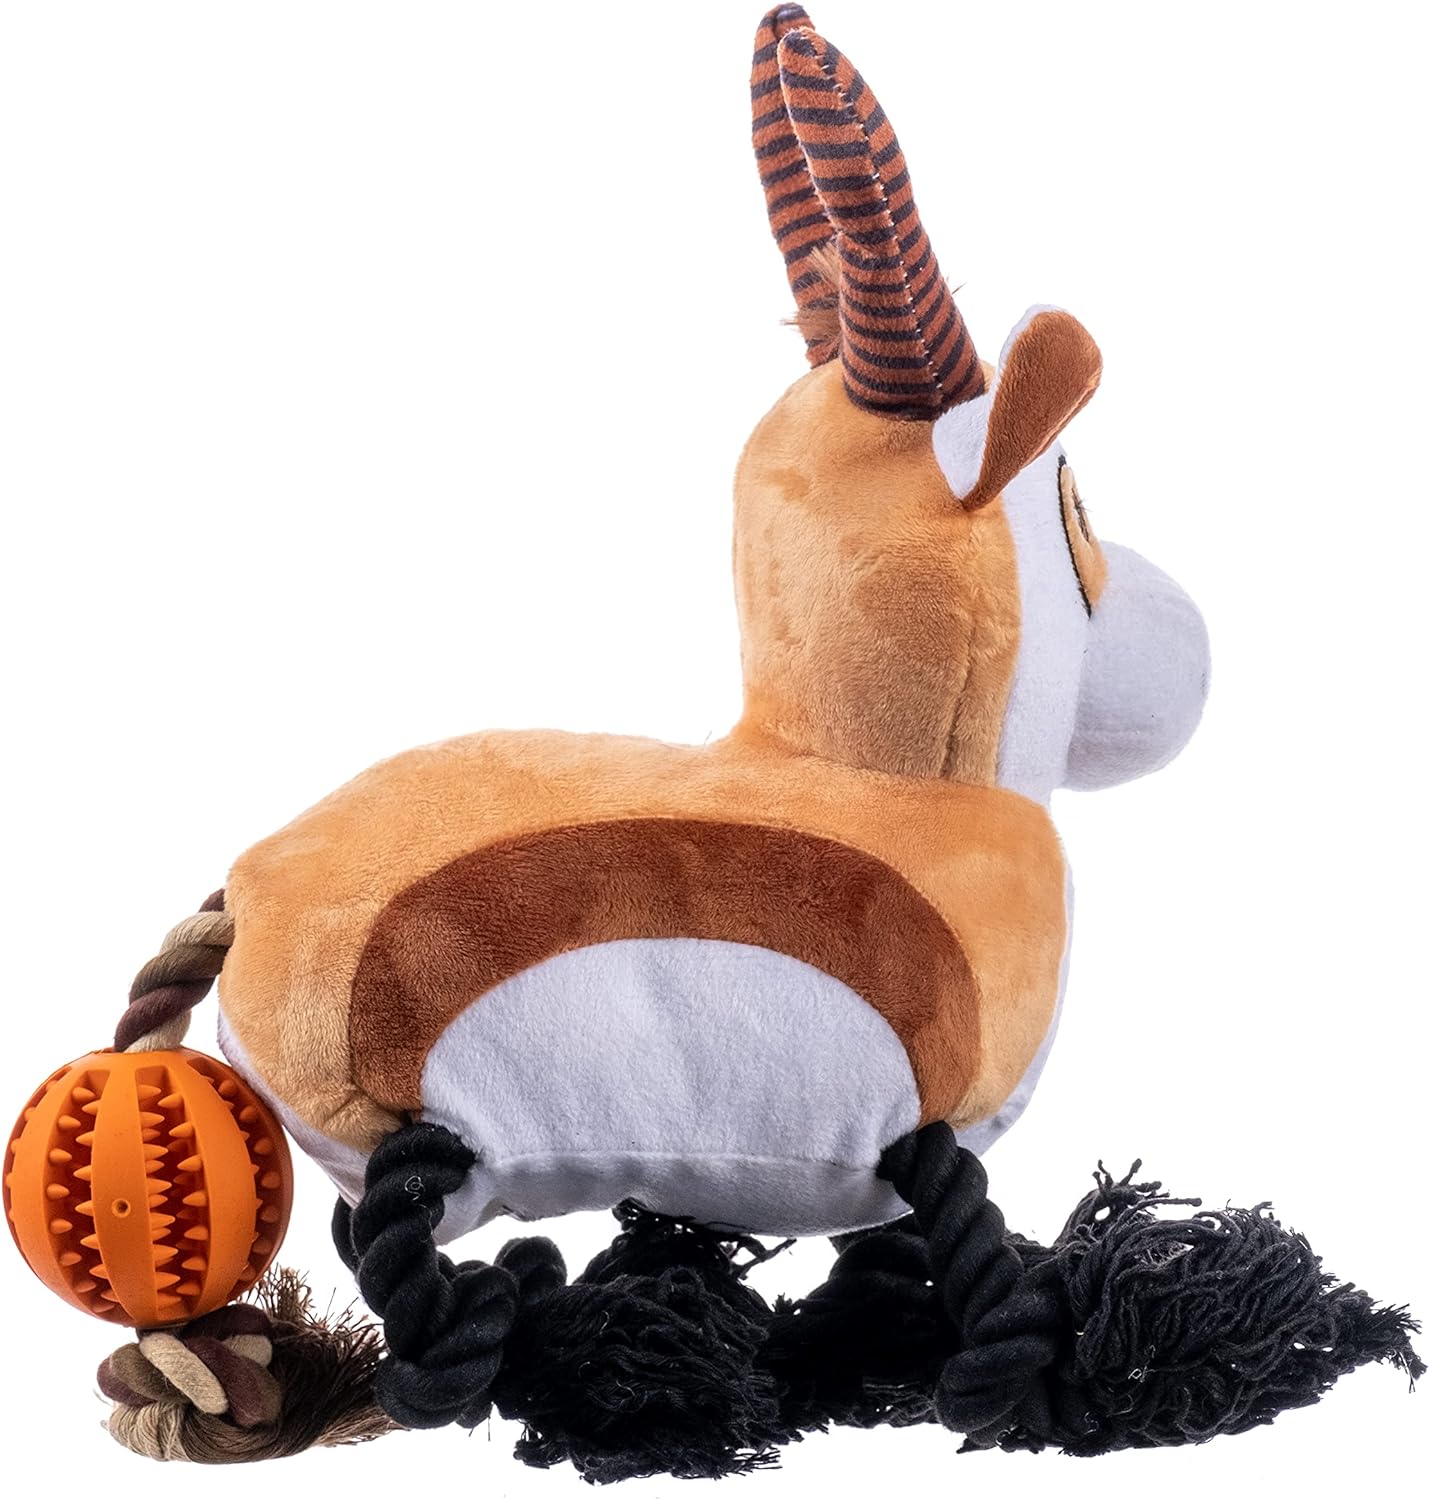 Springbok Antelope 12 x 8 Inch Durable Soft Plush Squeaky Rope Dog Toy, 8 Pack